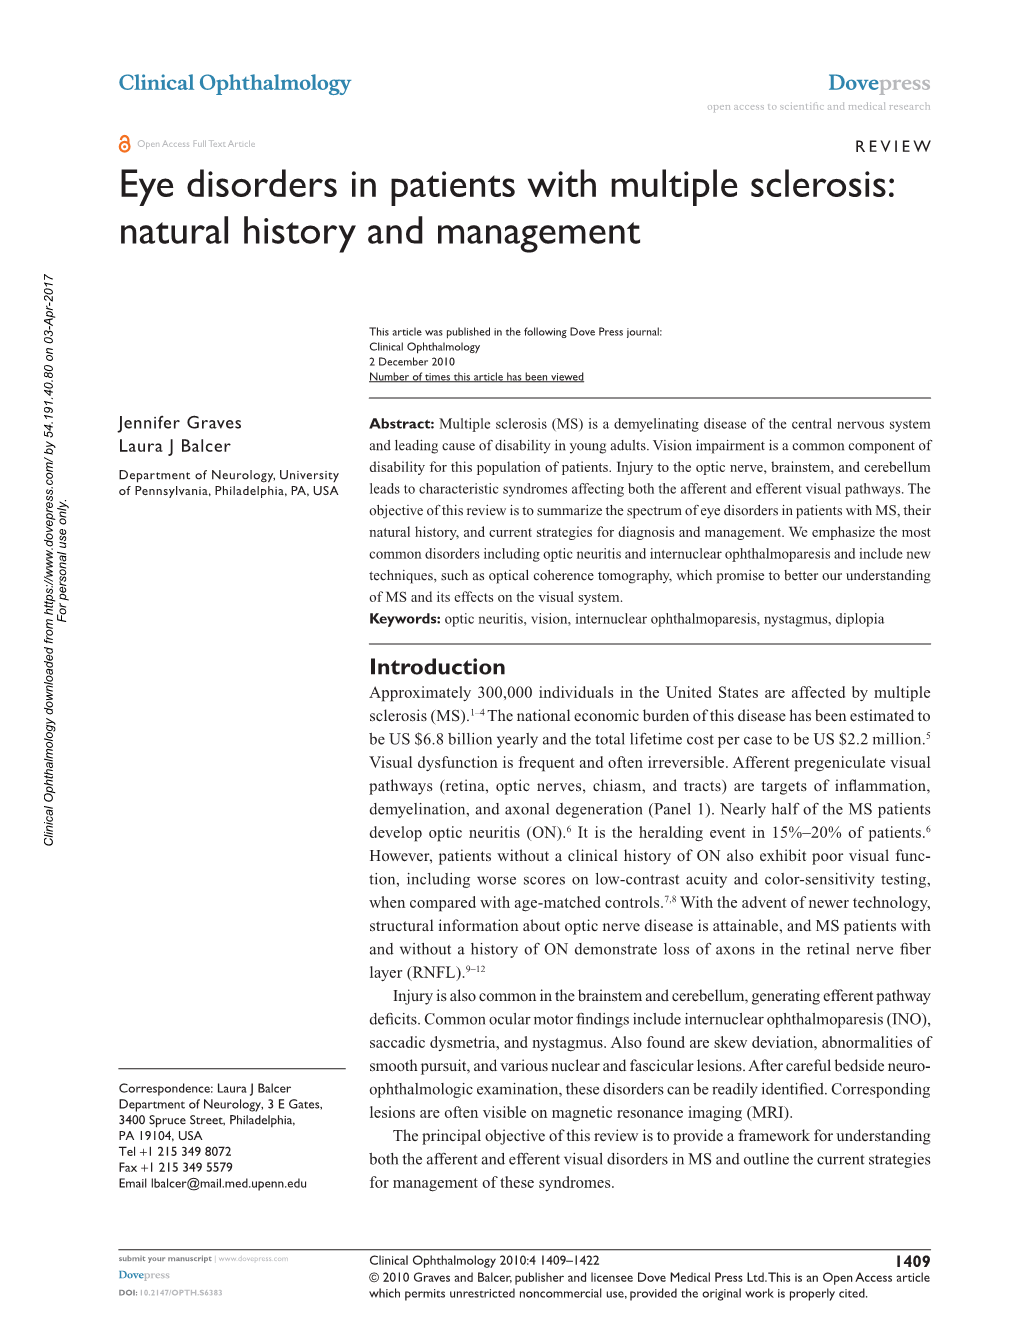 Eye Disorders in Patients with Multiple Sclerosis: Natural History and Management